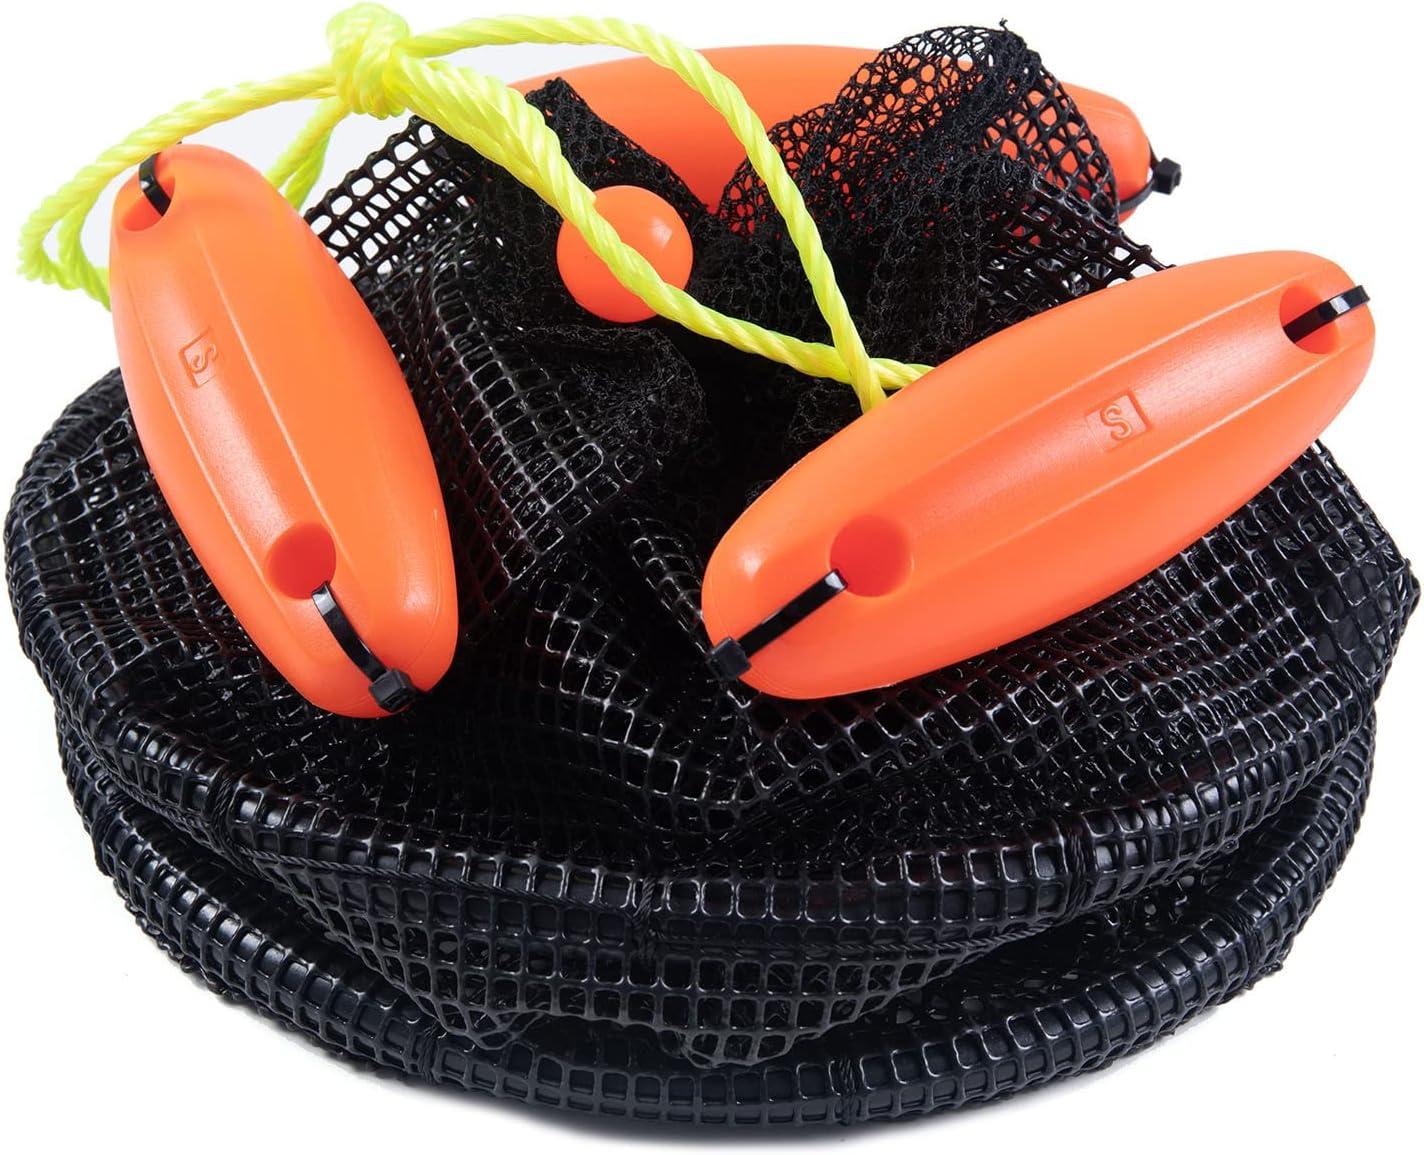 Z&W 5 Gallon Collapsible Floating Fishing Net Live Bait Bucket/Fishing  Basket/Chum Bag, Trap for Keeping Minnows, Shrimp, Leaches and Other Baits